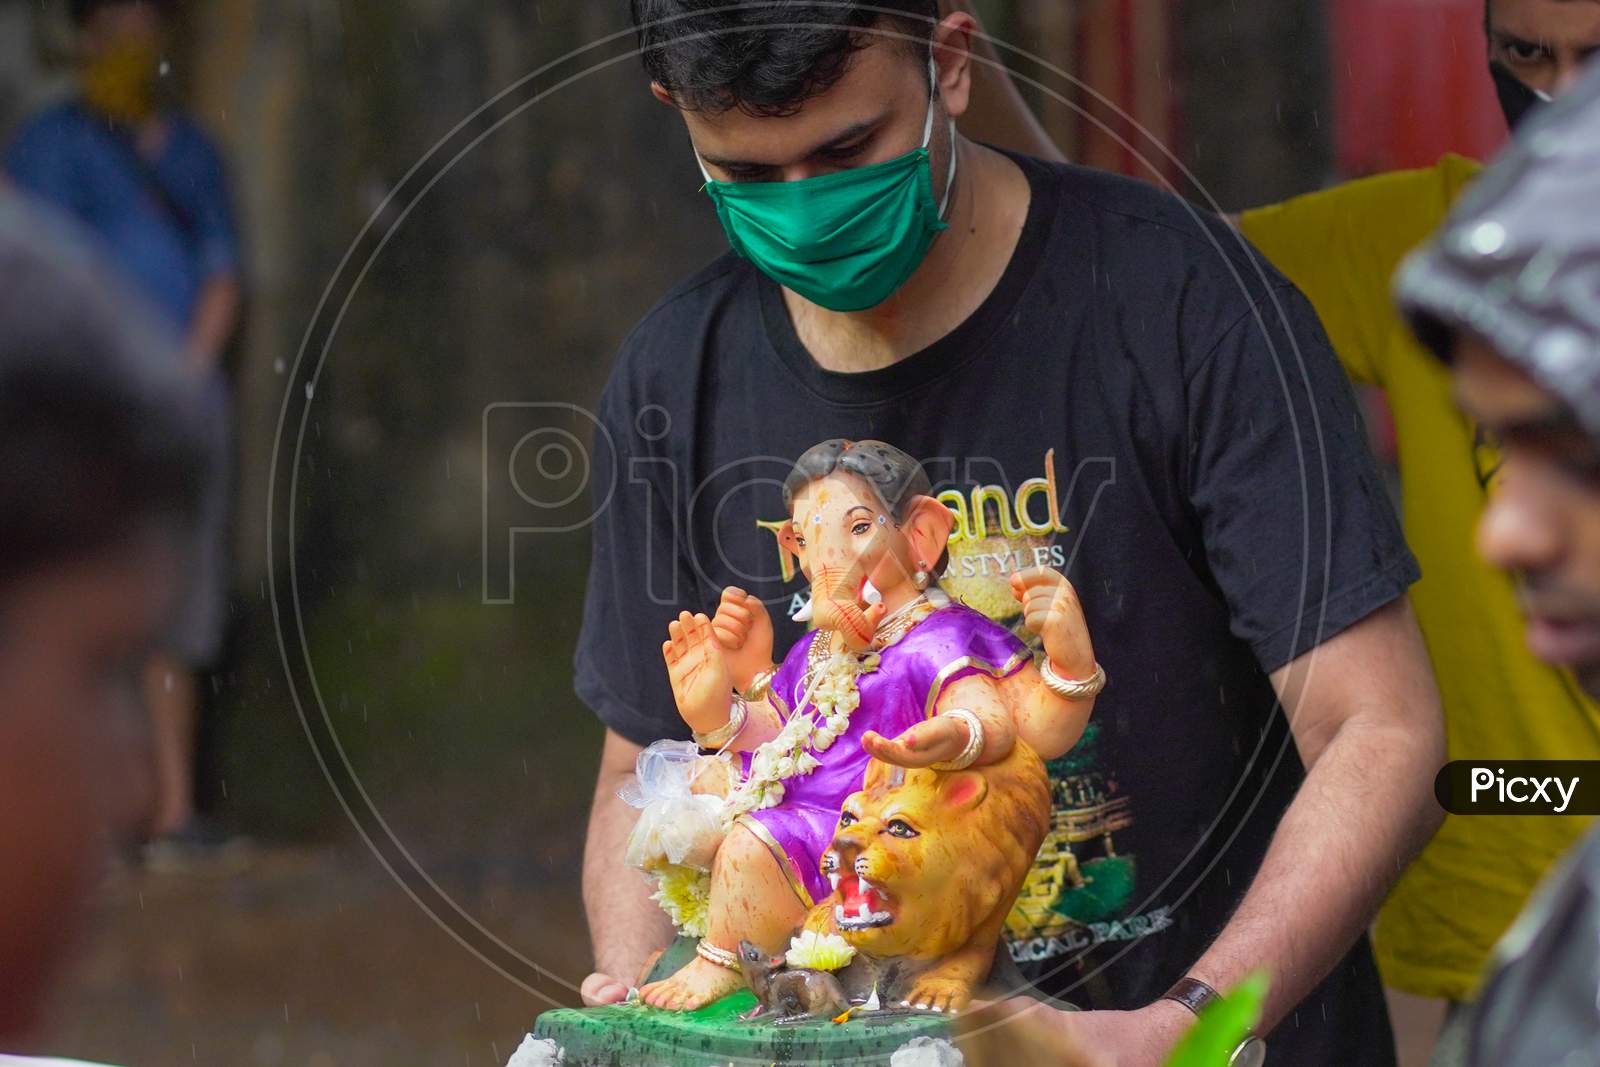 Ganesh idol immersion in covid 19 pandemic restrictions. Ganpati Visarjan In Man Made pond People With Mask